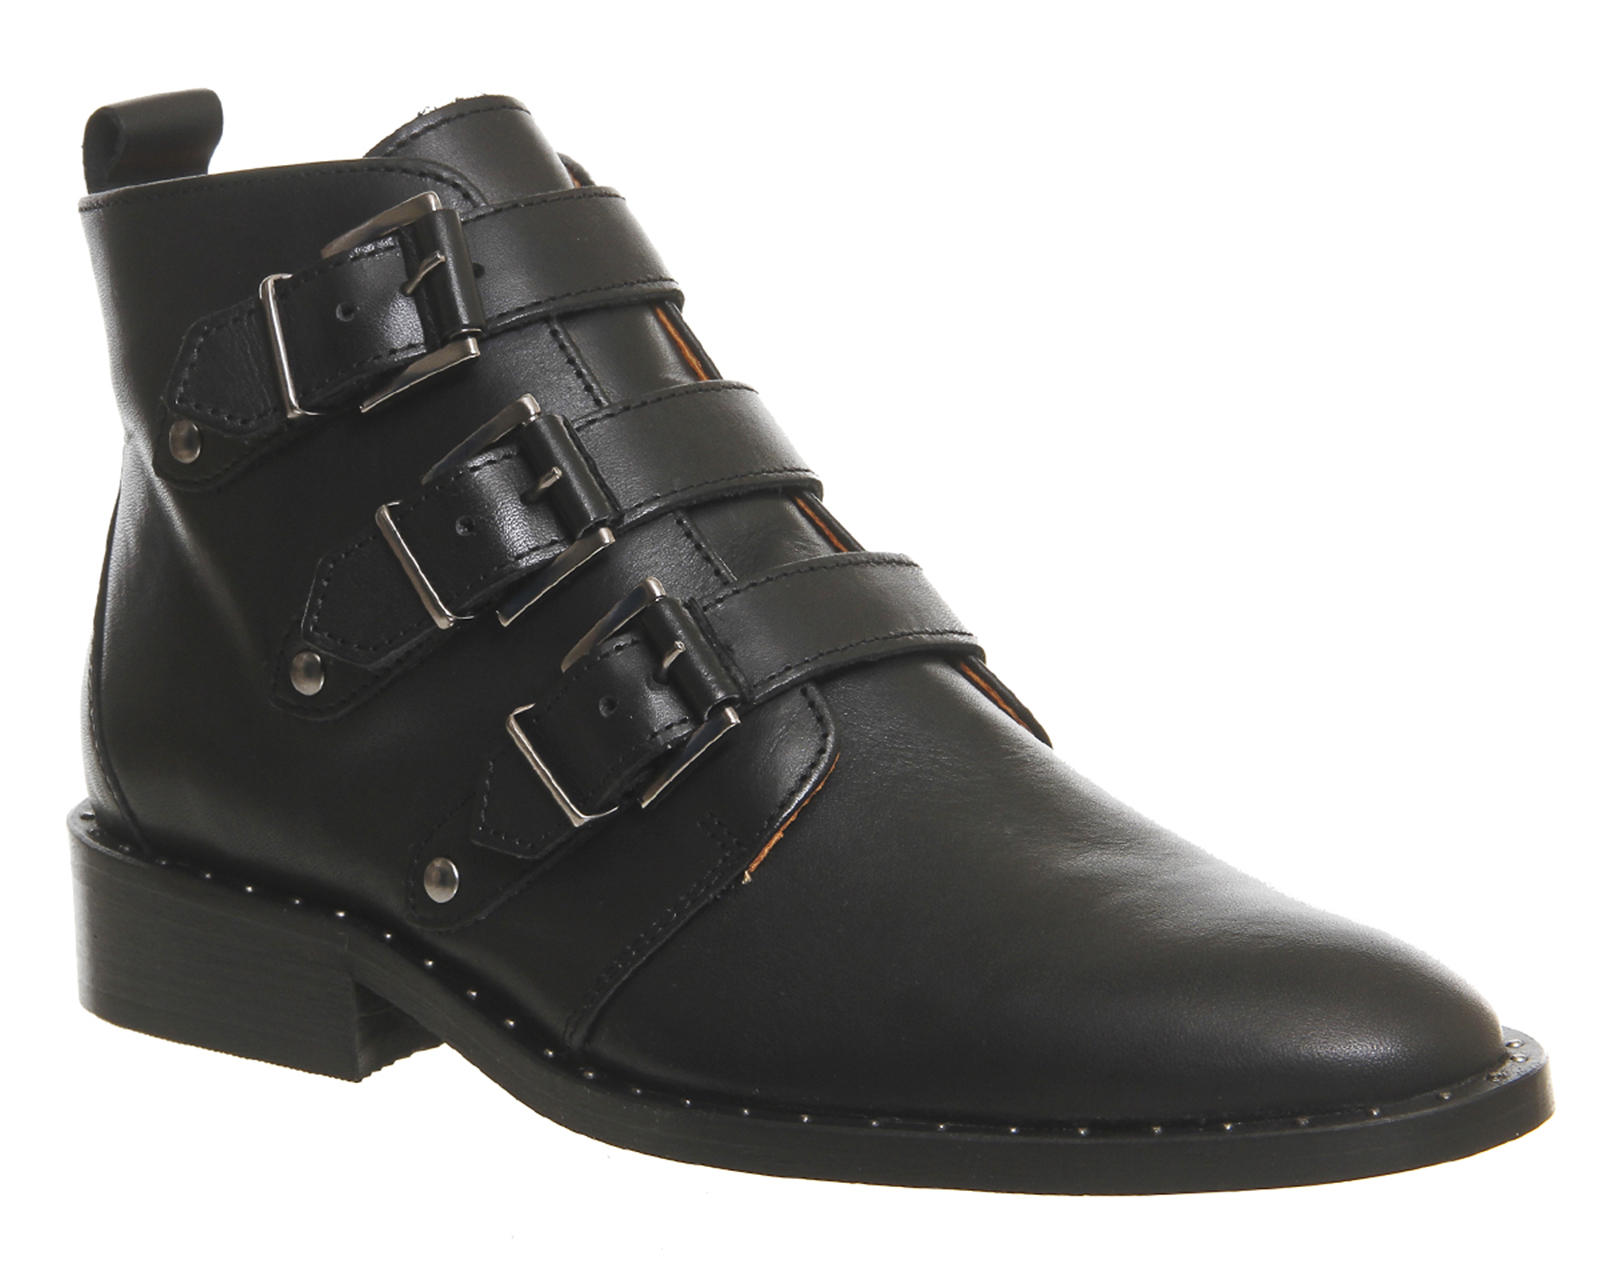 OFFICELock Down Buckle BootsBlack Leather